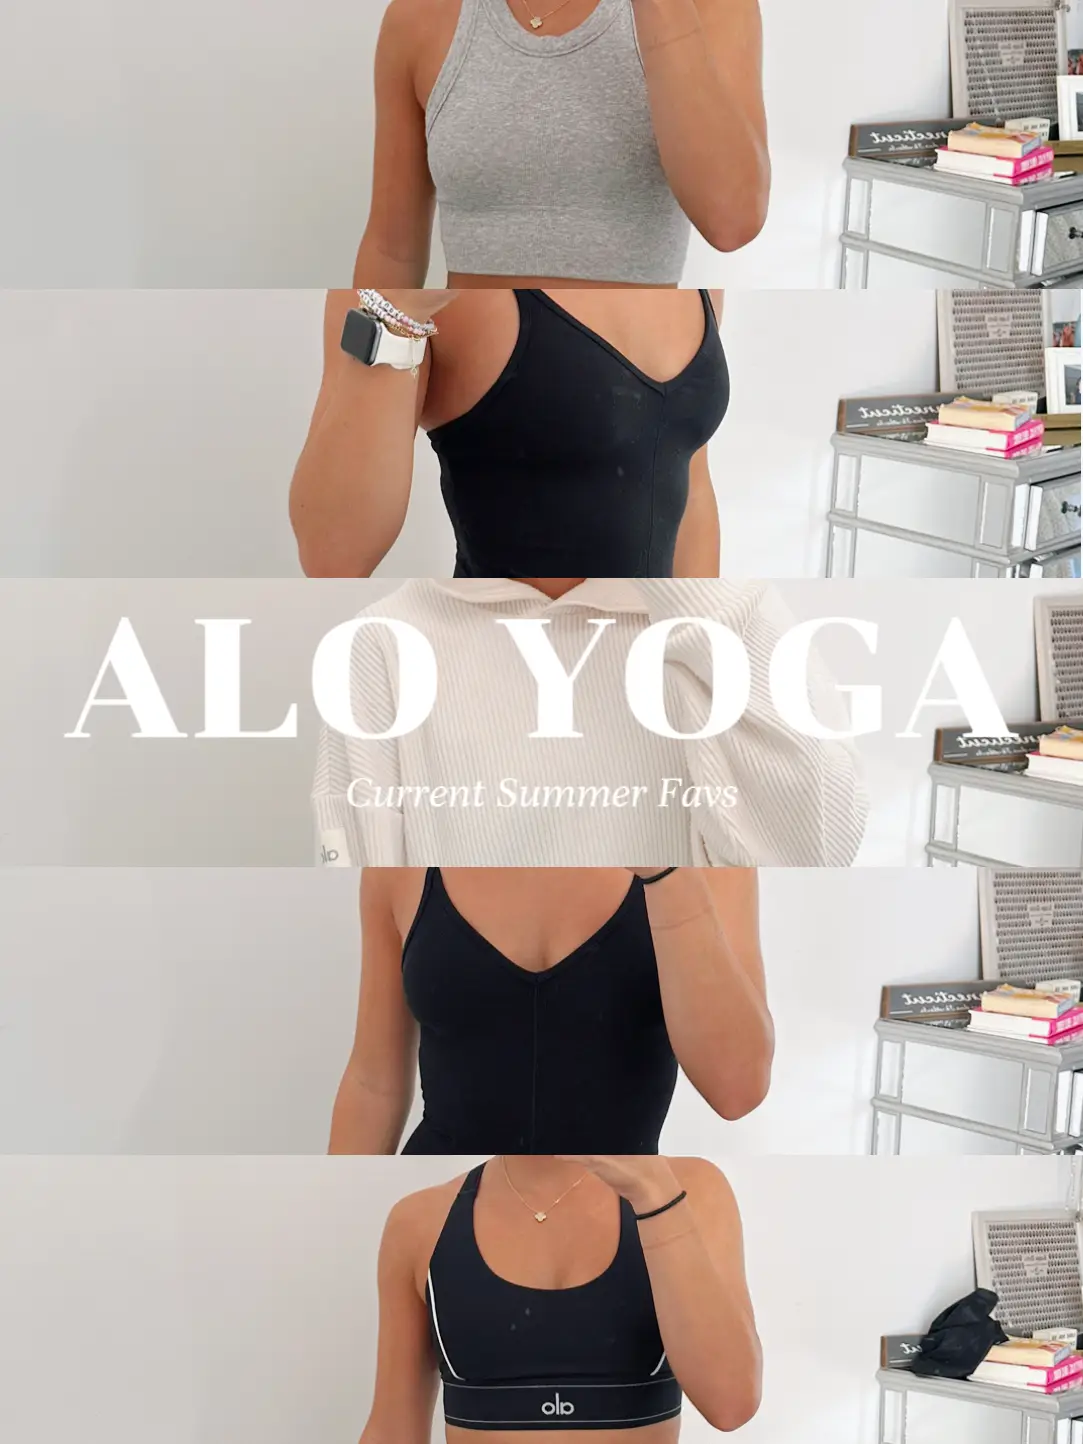 What I got from Alo yoga 🧘‍♀️🫶🏽